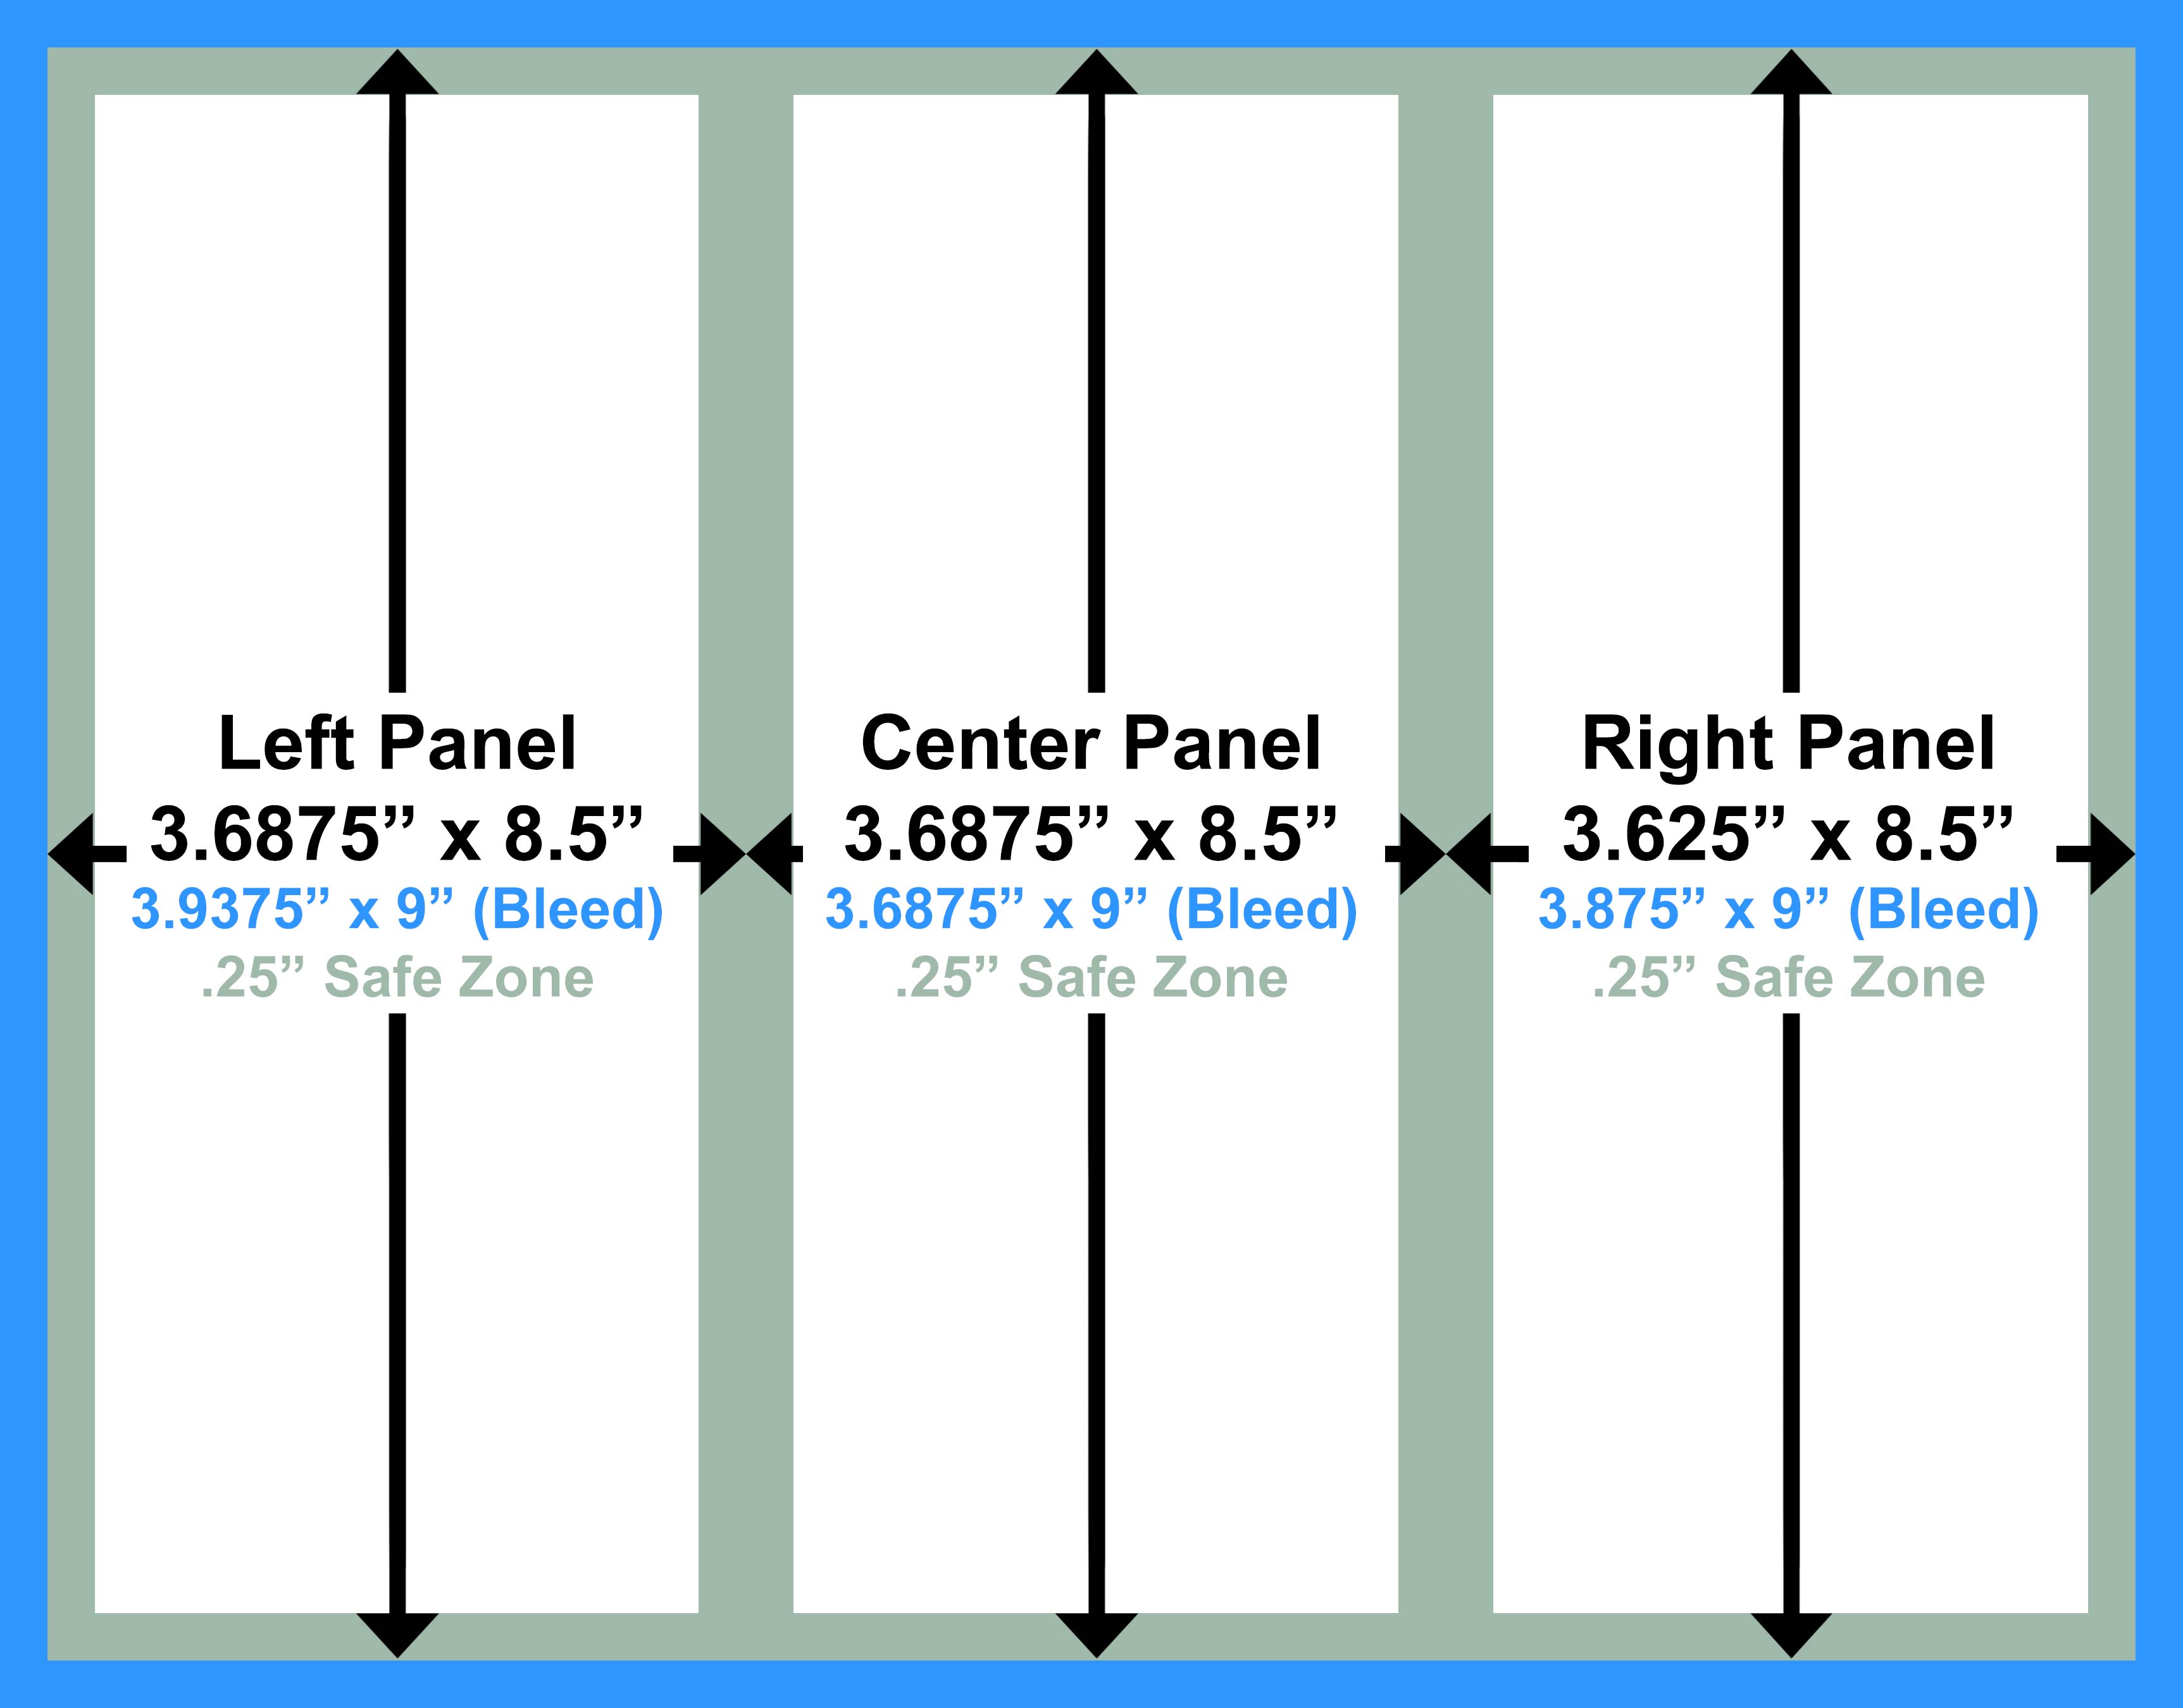 Inside panel dimensions for tri-fold brochure with Bleed printing